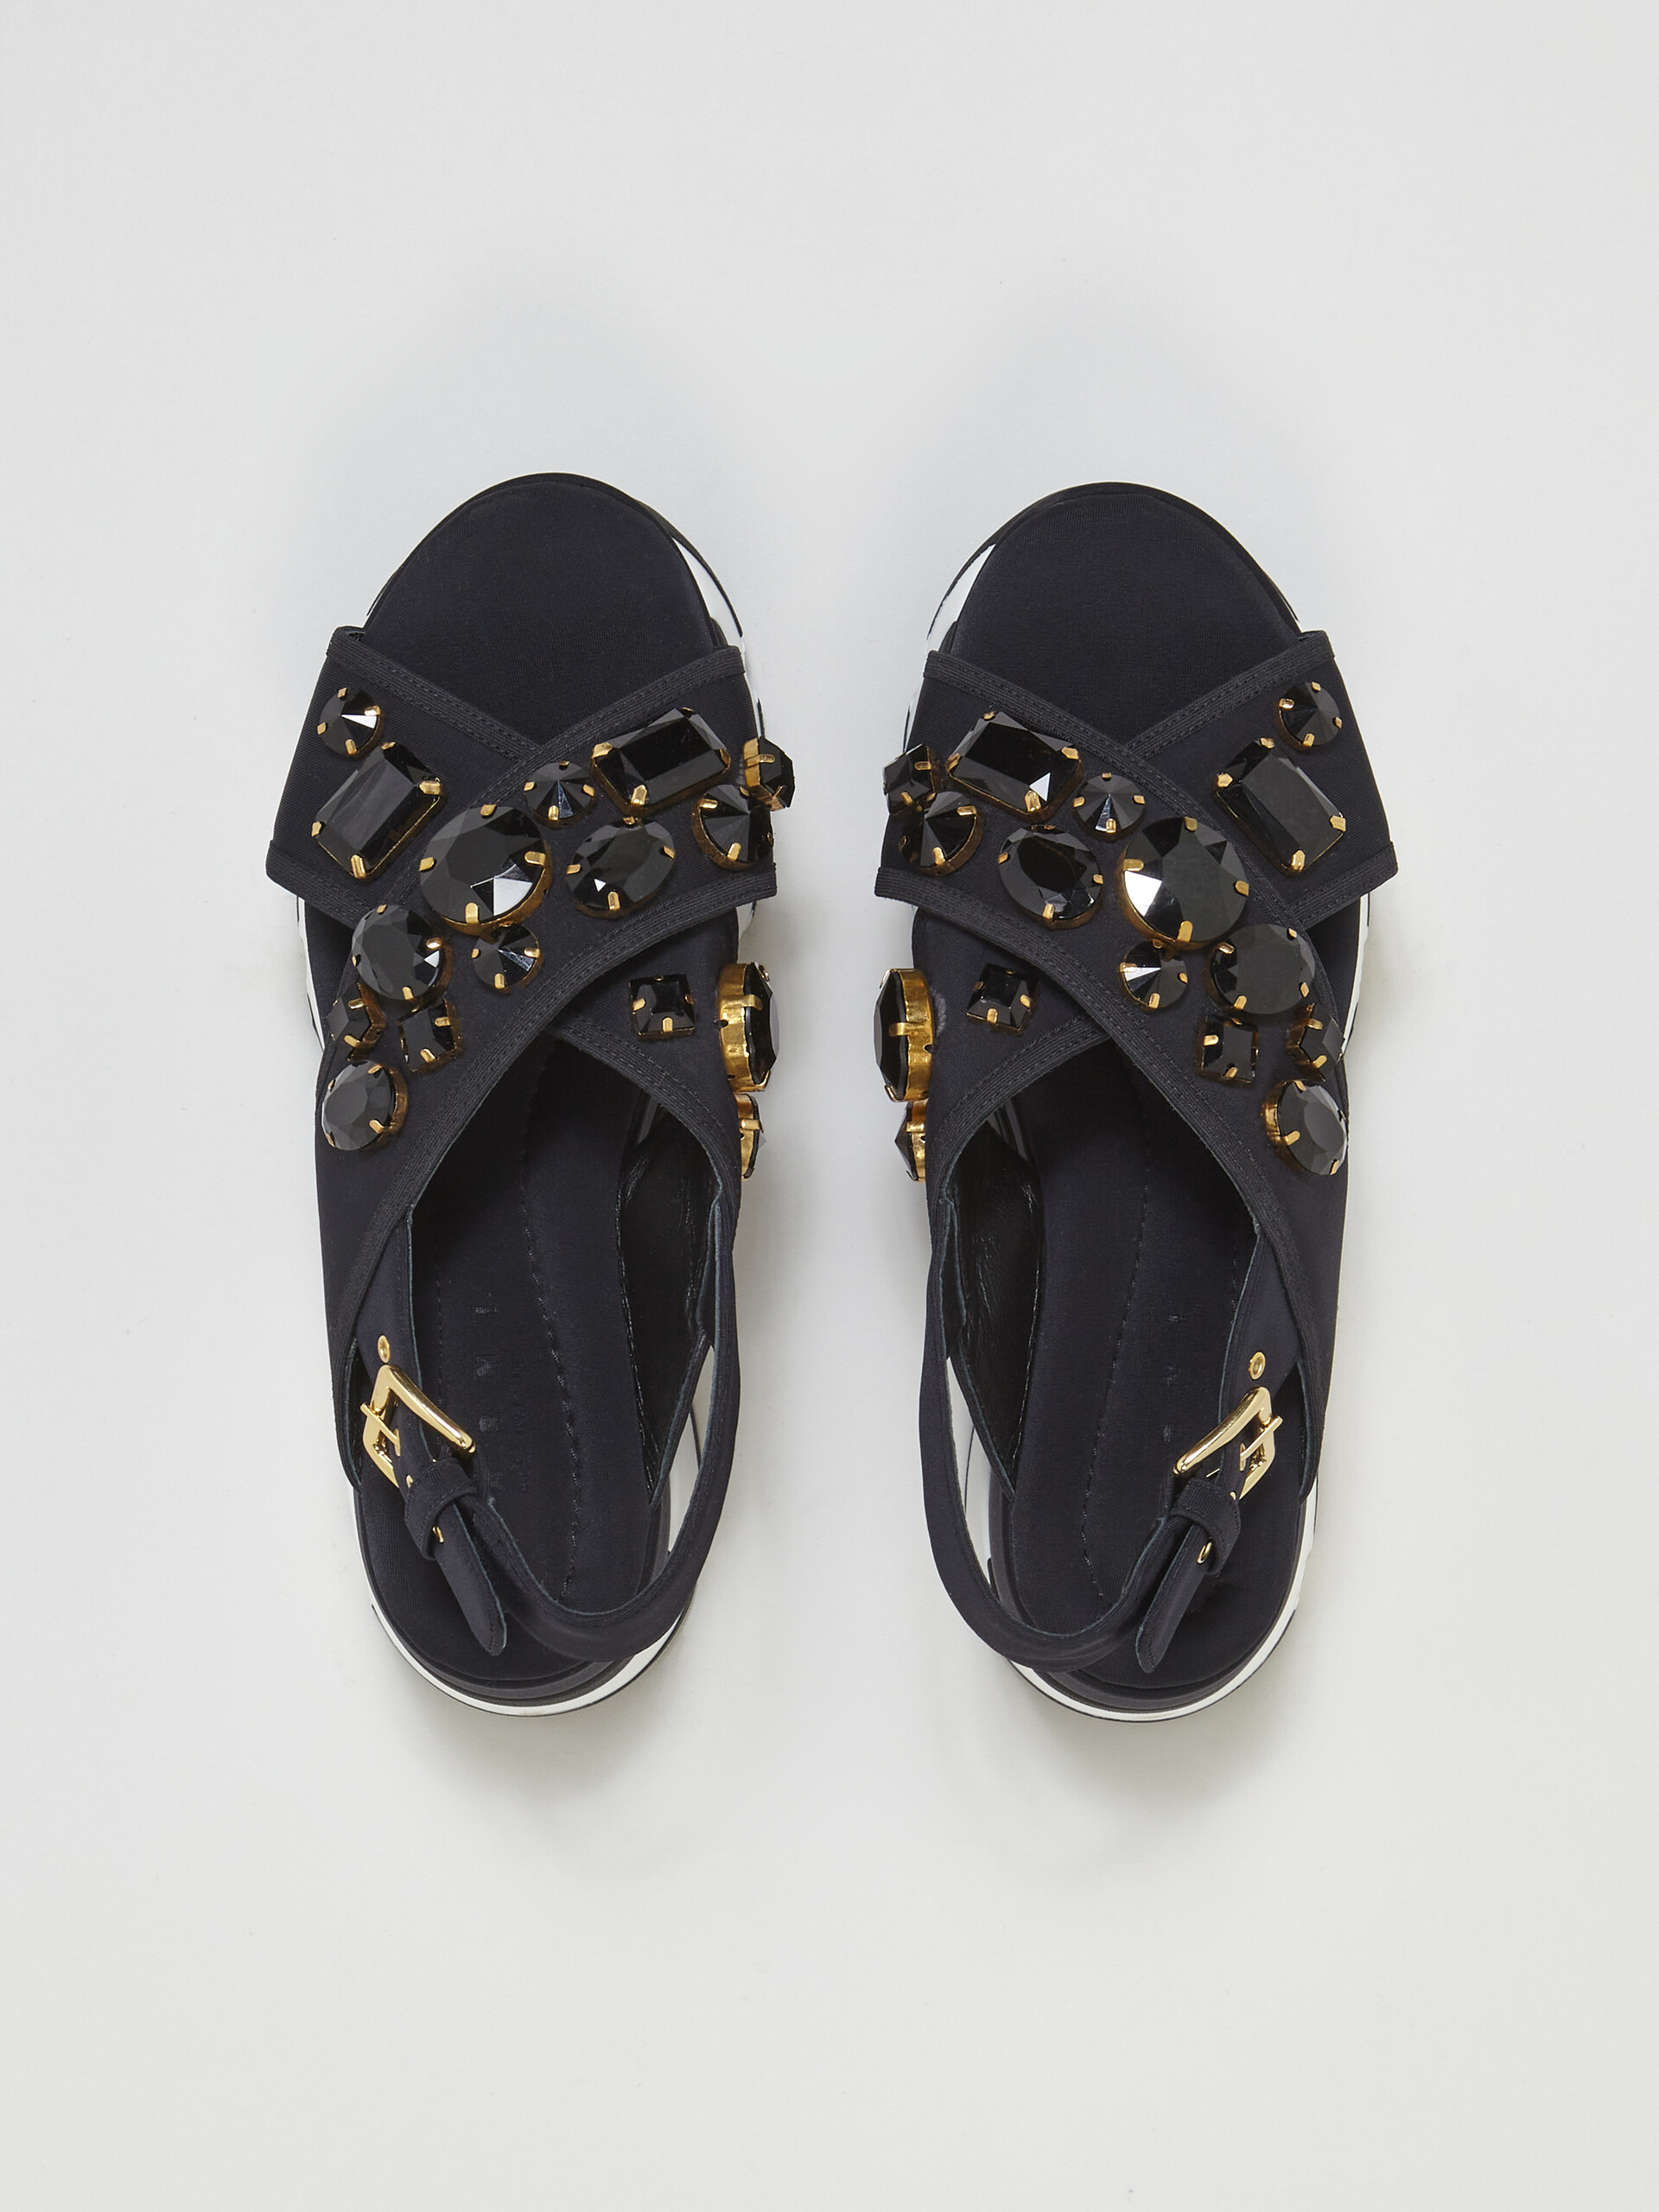 Black wedge in technical fabric - Sandals - Image 4